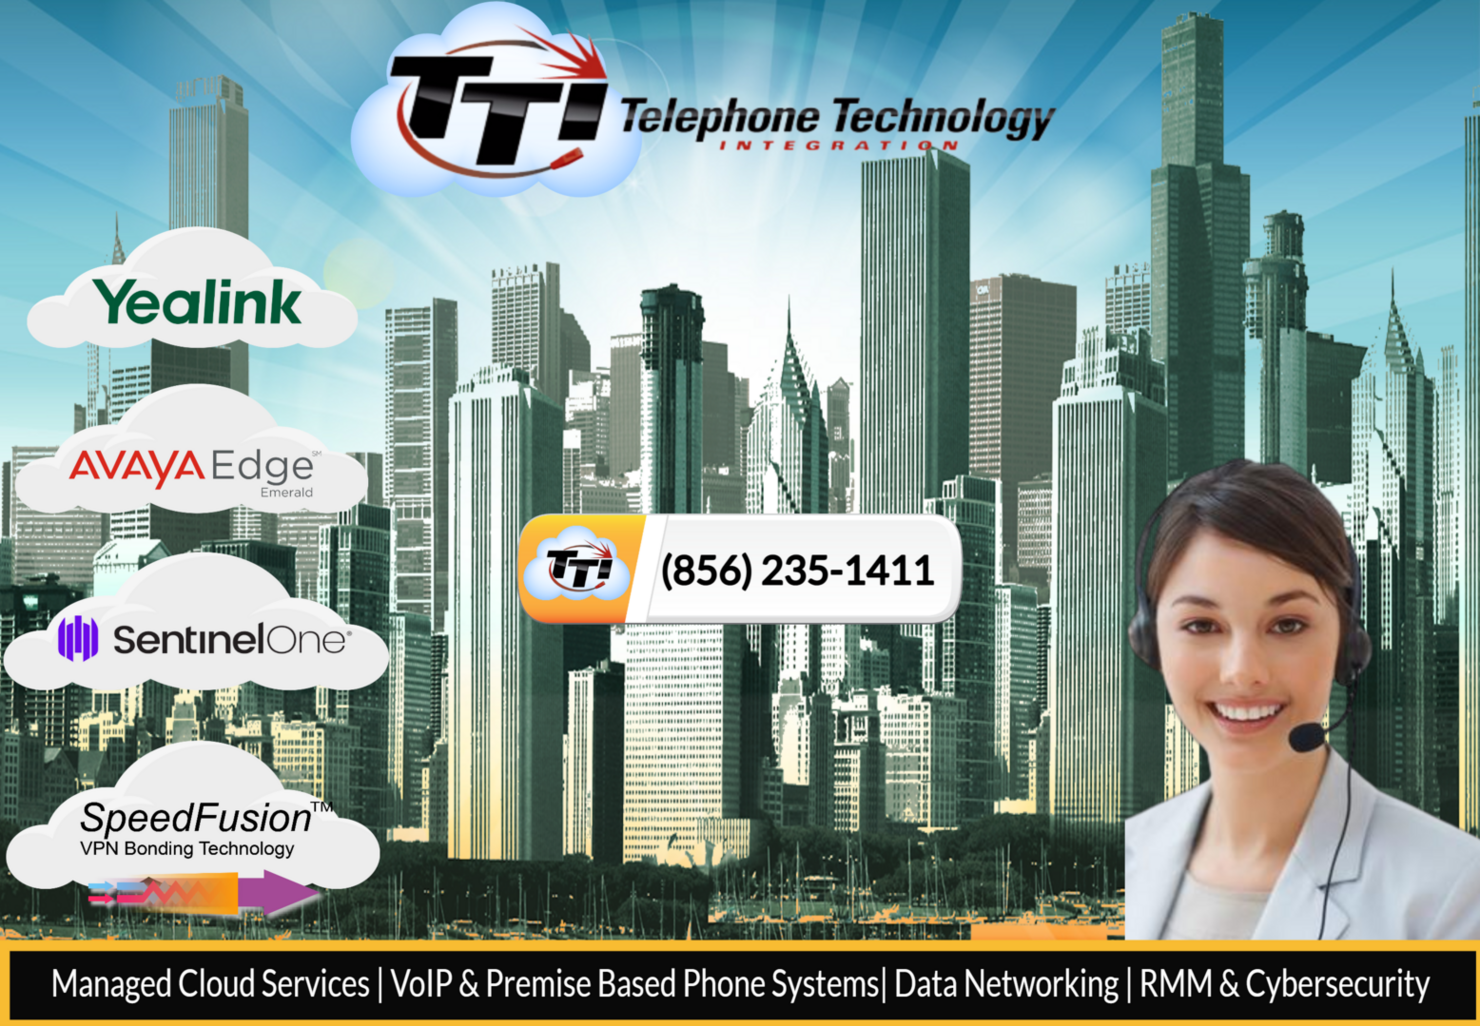 Managed Cloud Services and VoIP